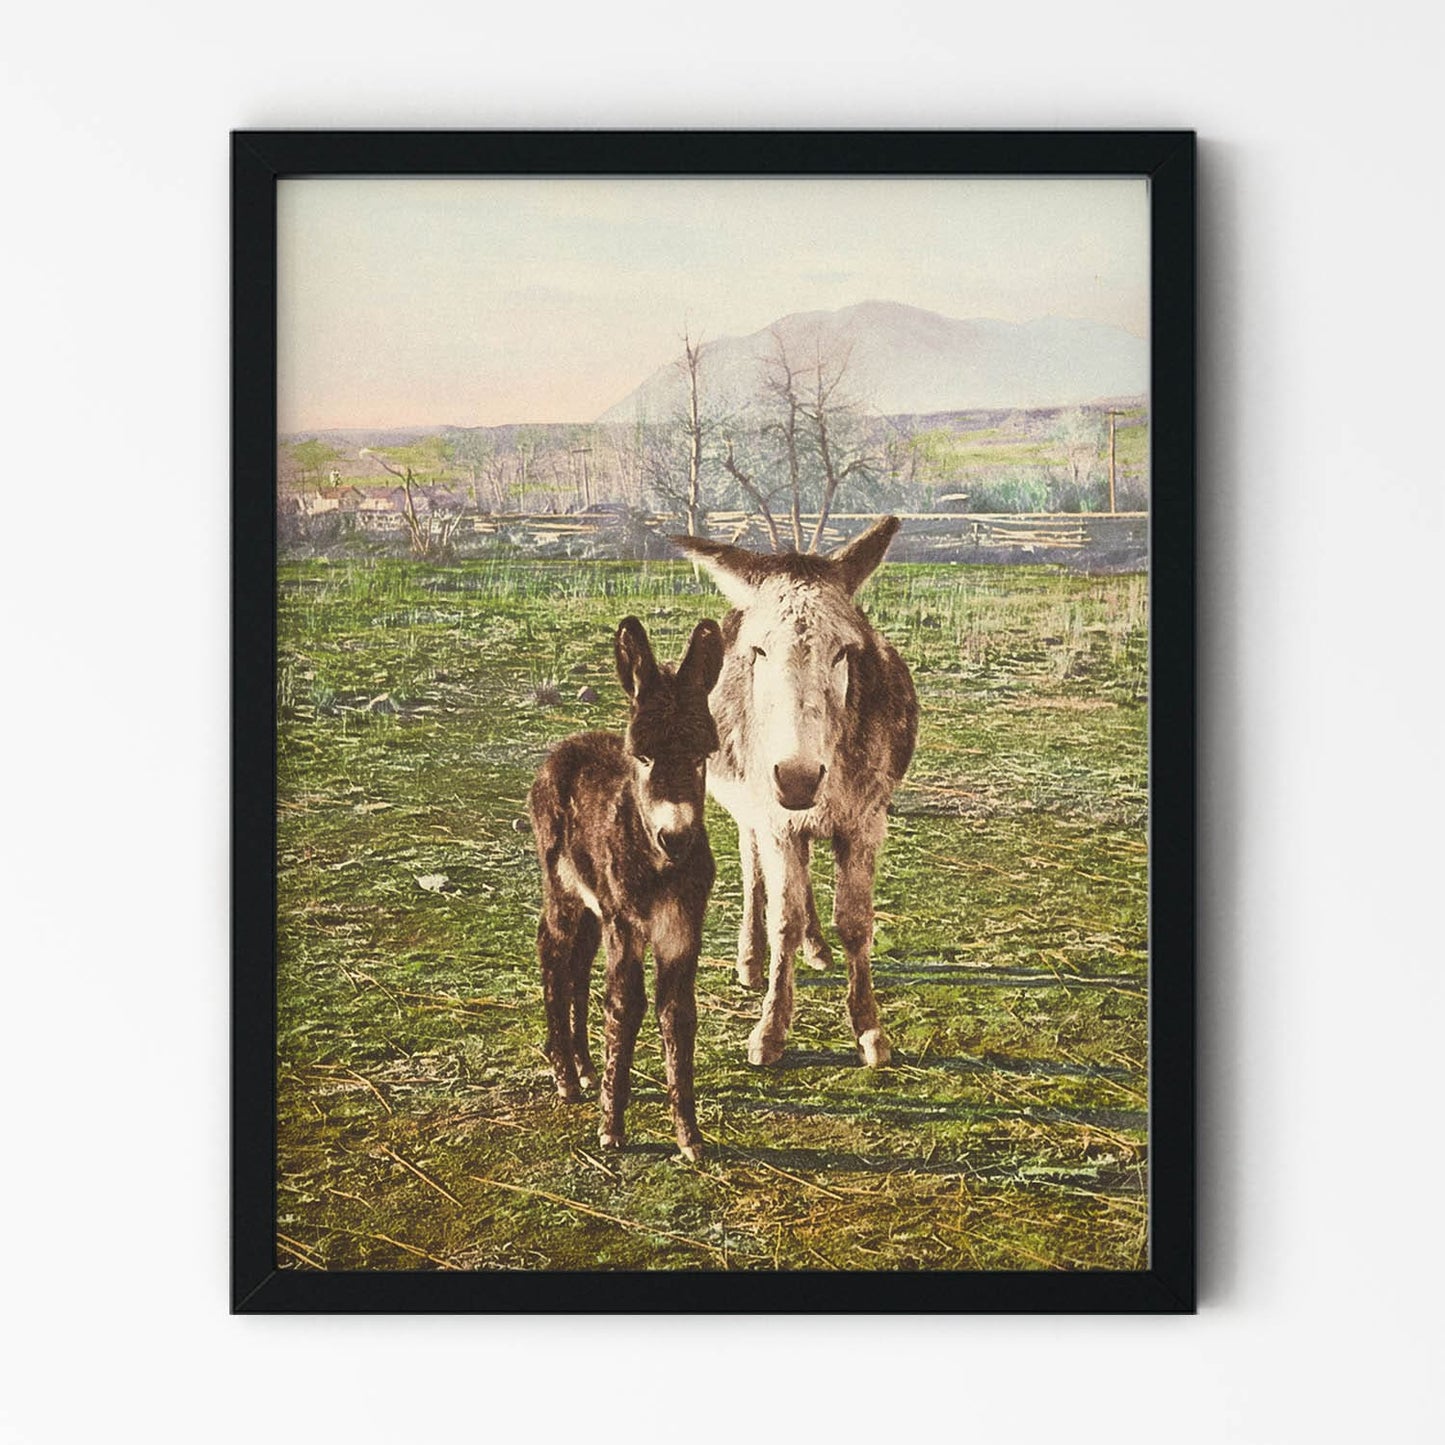 Two Donkey's in the Mountains Picture in Black Picture Frame